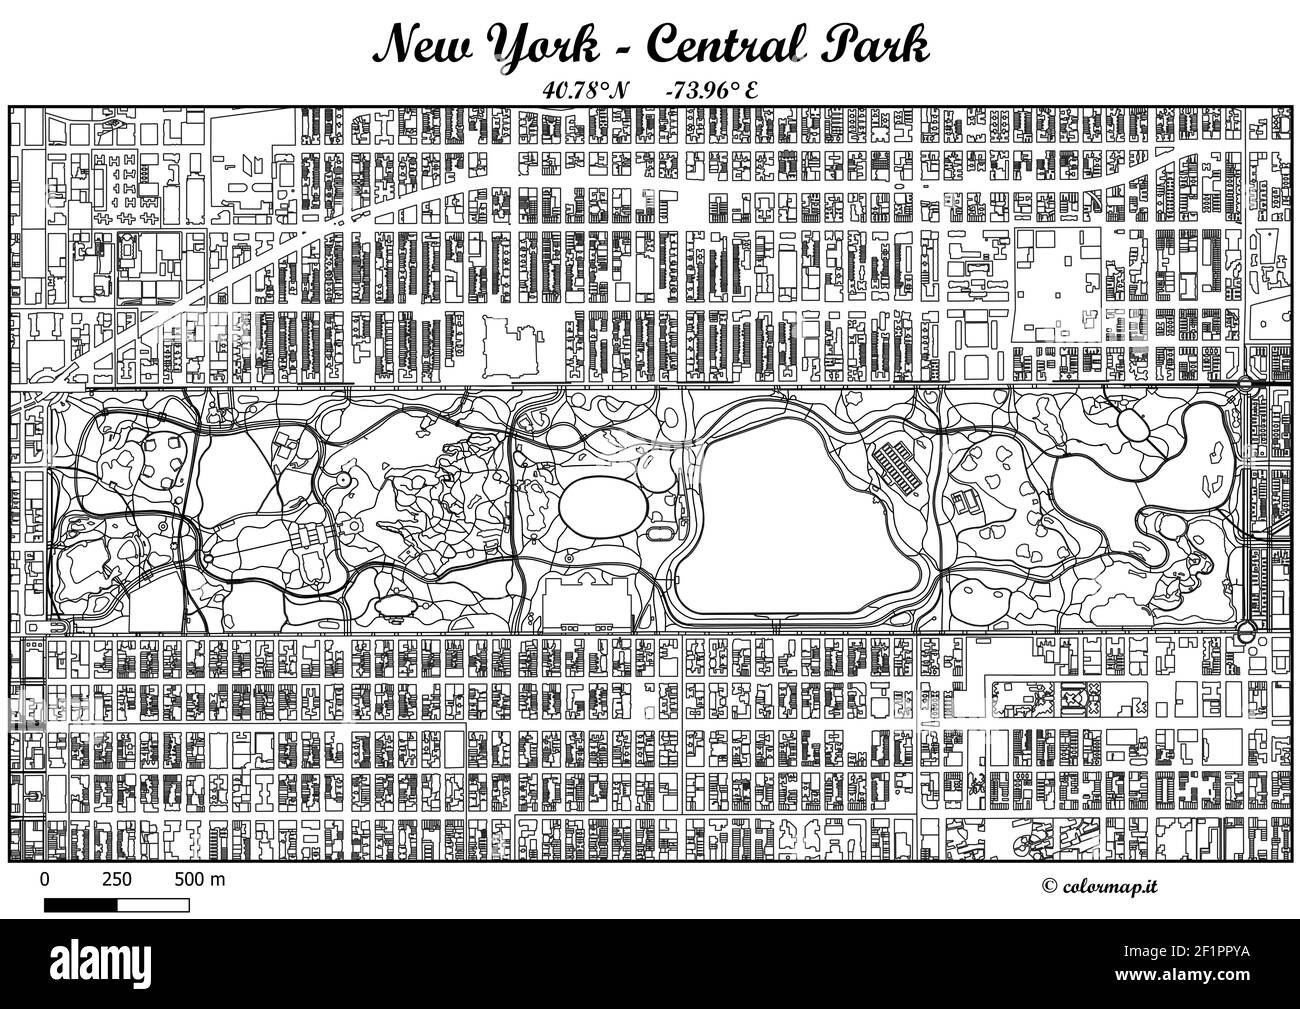 ColorMap JPG HI-RES (6000x4000px -513dpi) New York Central Park, U.S. Printable for any size you want Stock Photo